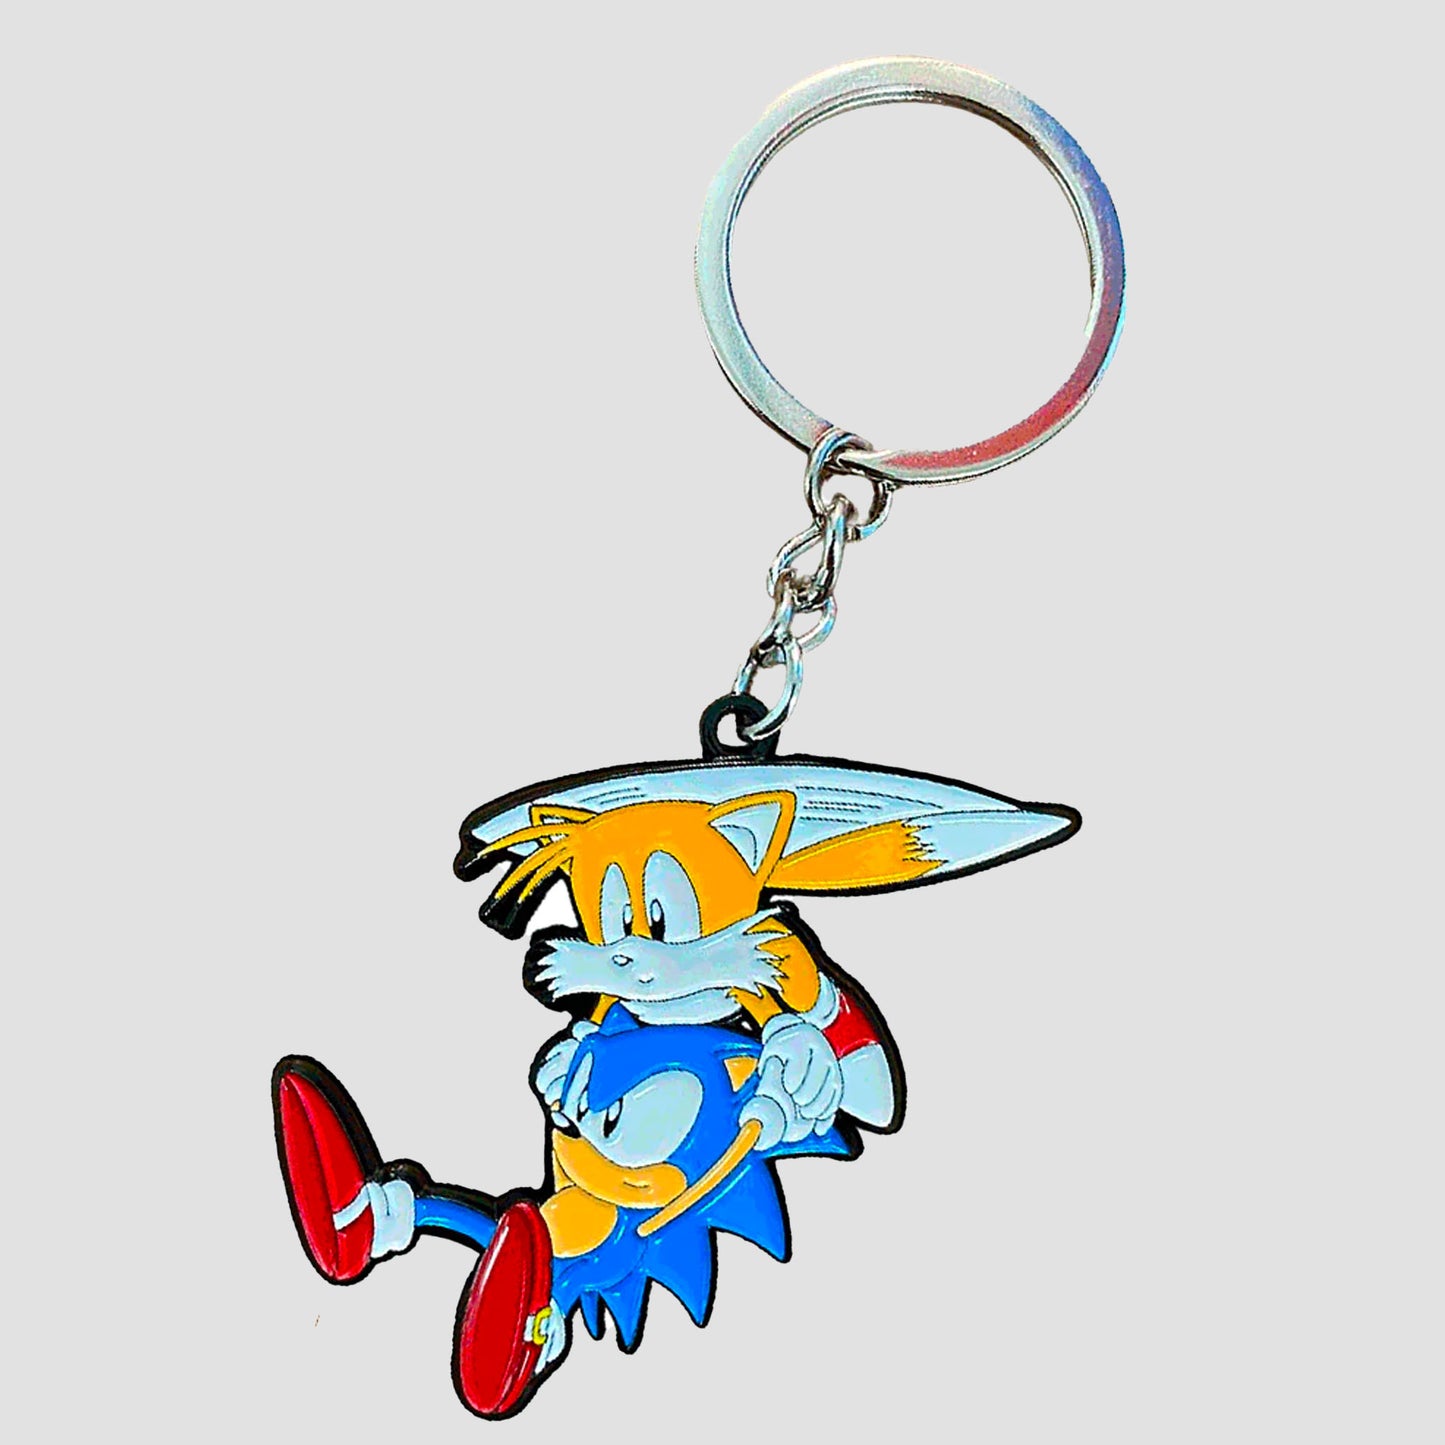 Sonic and Tails (Sonic the Hedgehog) Flying Classic Enamel Keychain